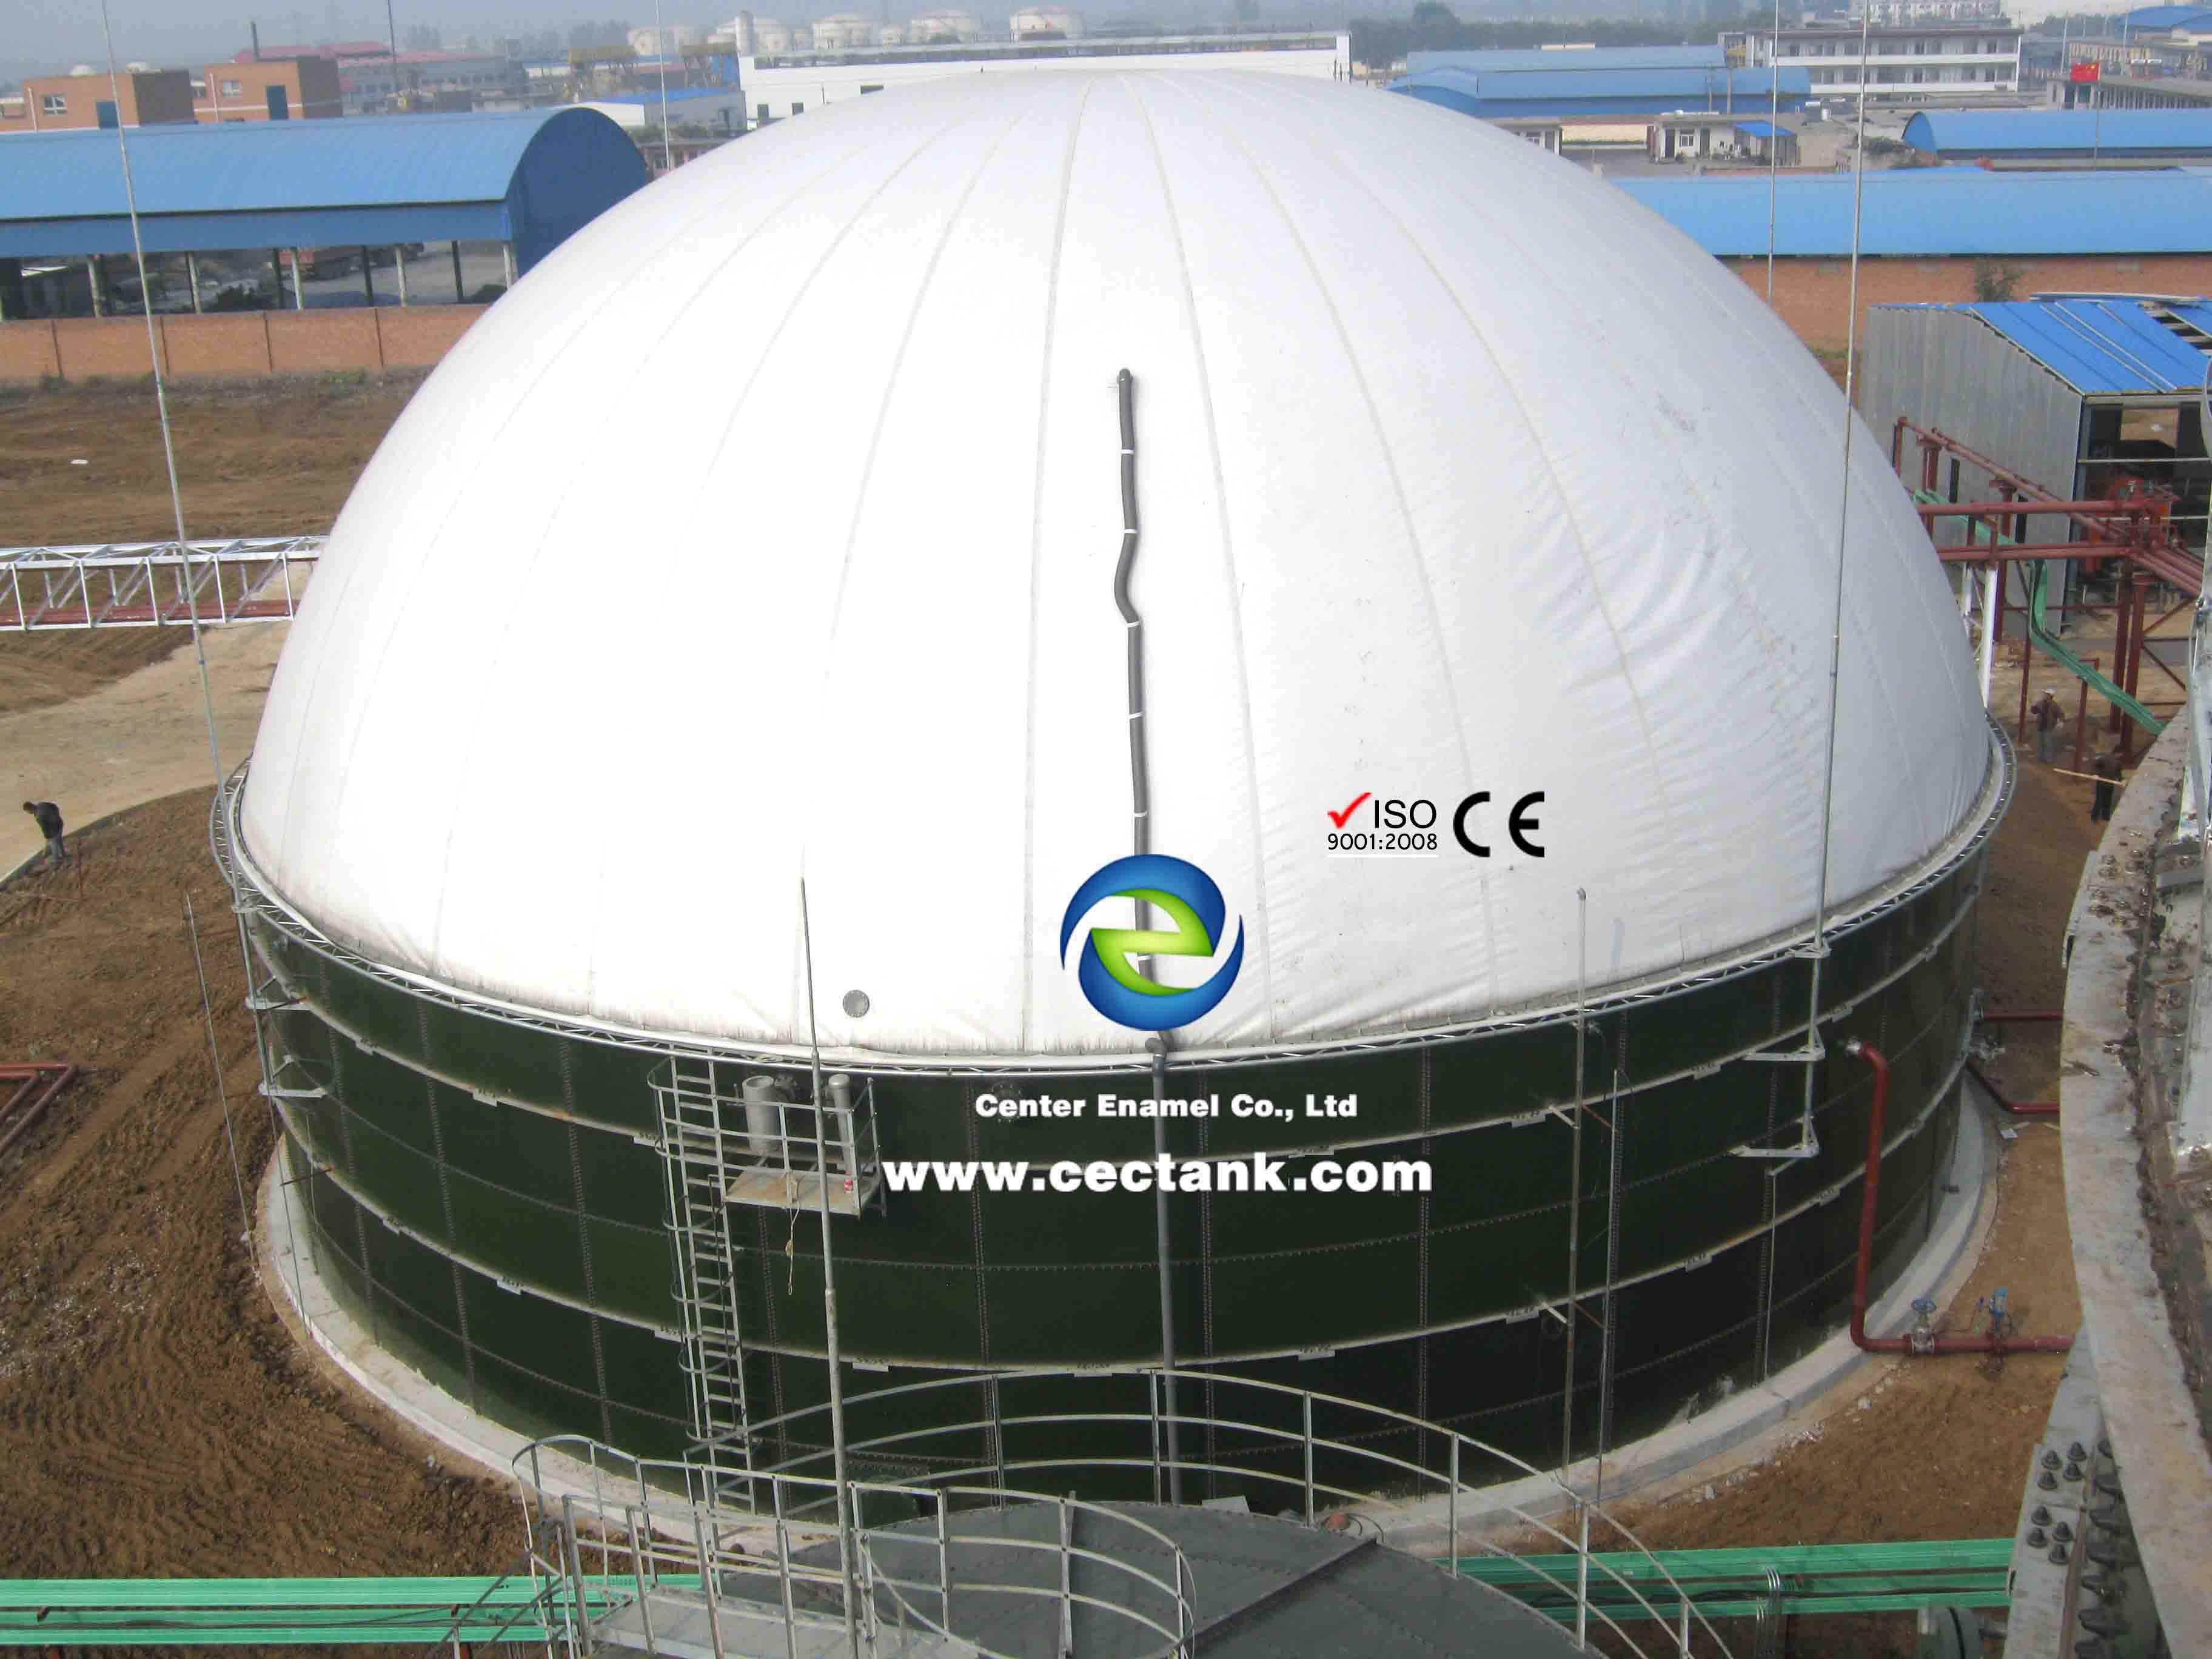 biogas reactor tank equipped with double membrane roof to co